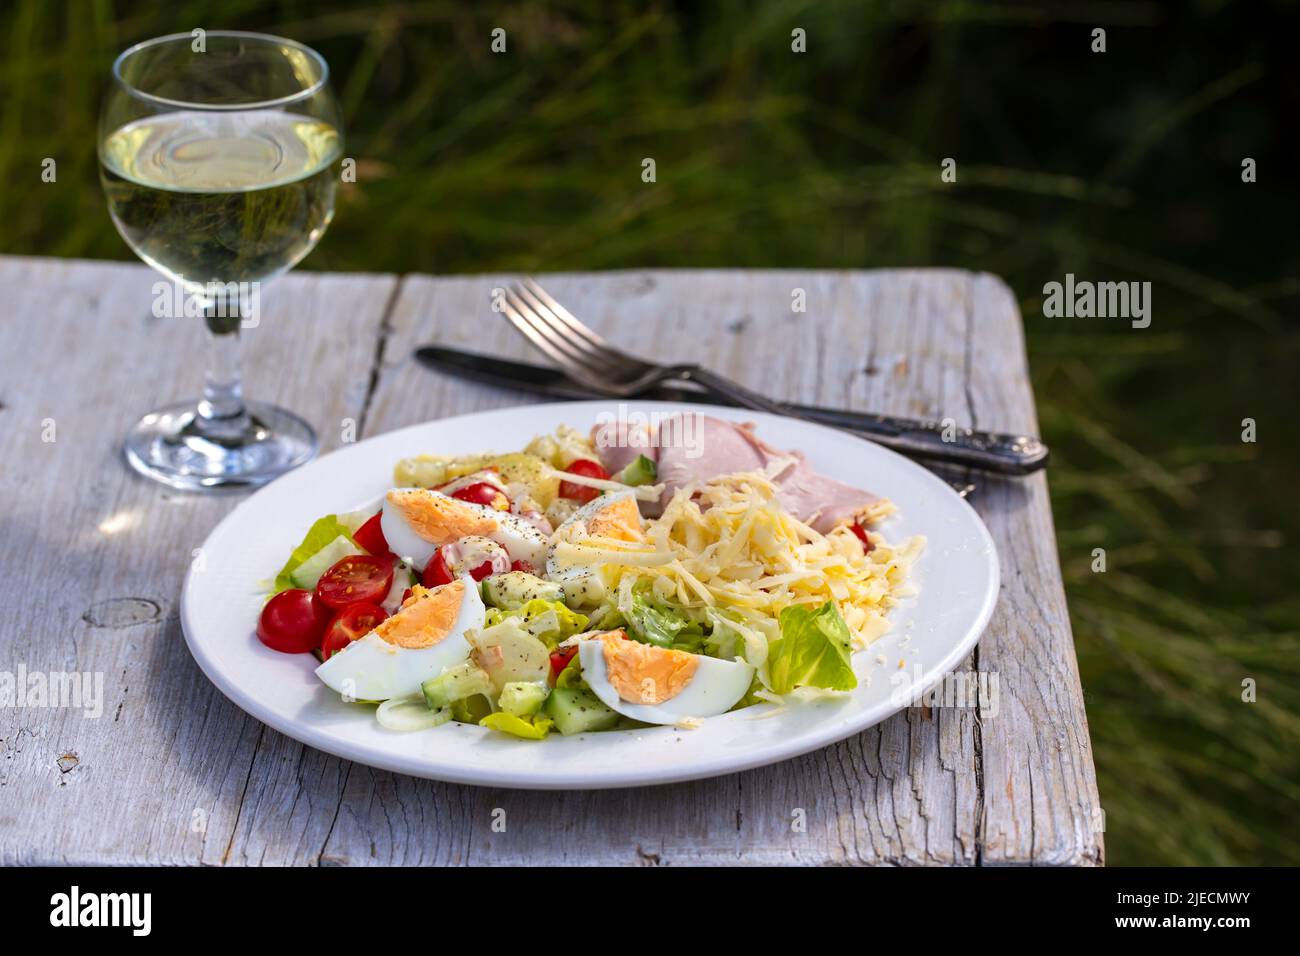 Simple summer meal with potatoes, salad, egg, cheese and ham Stock Photo